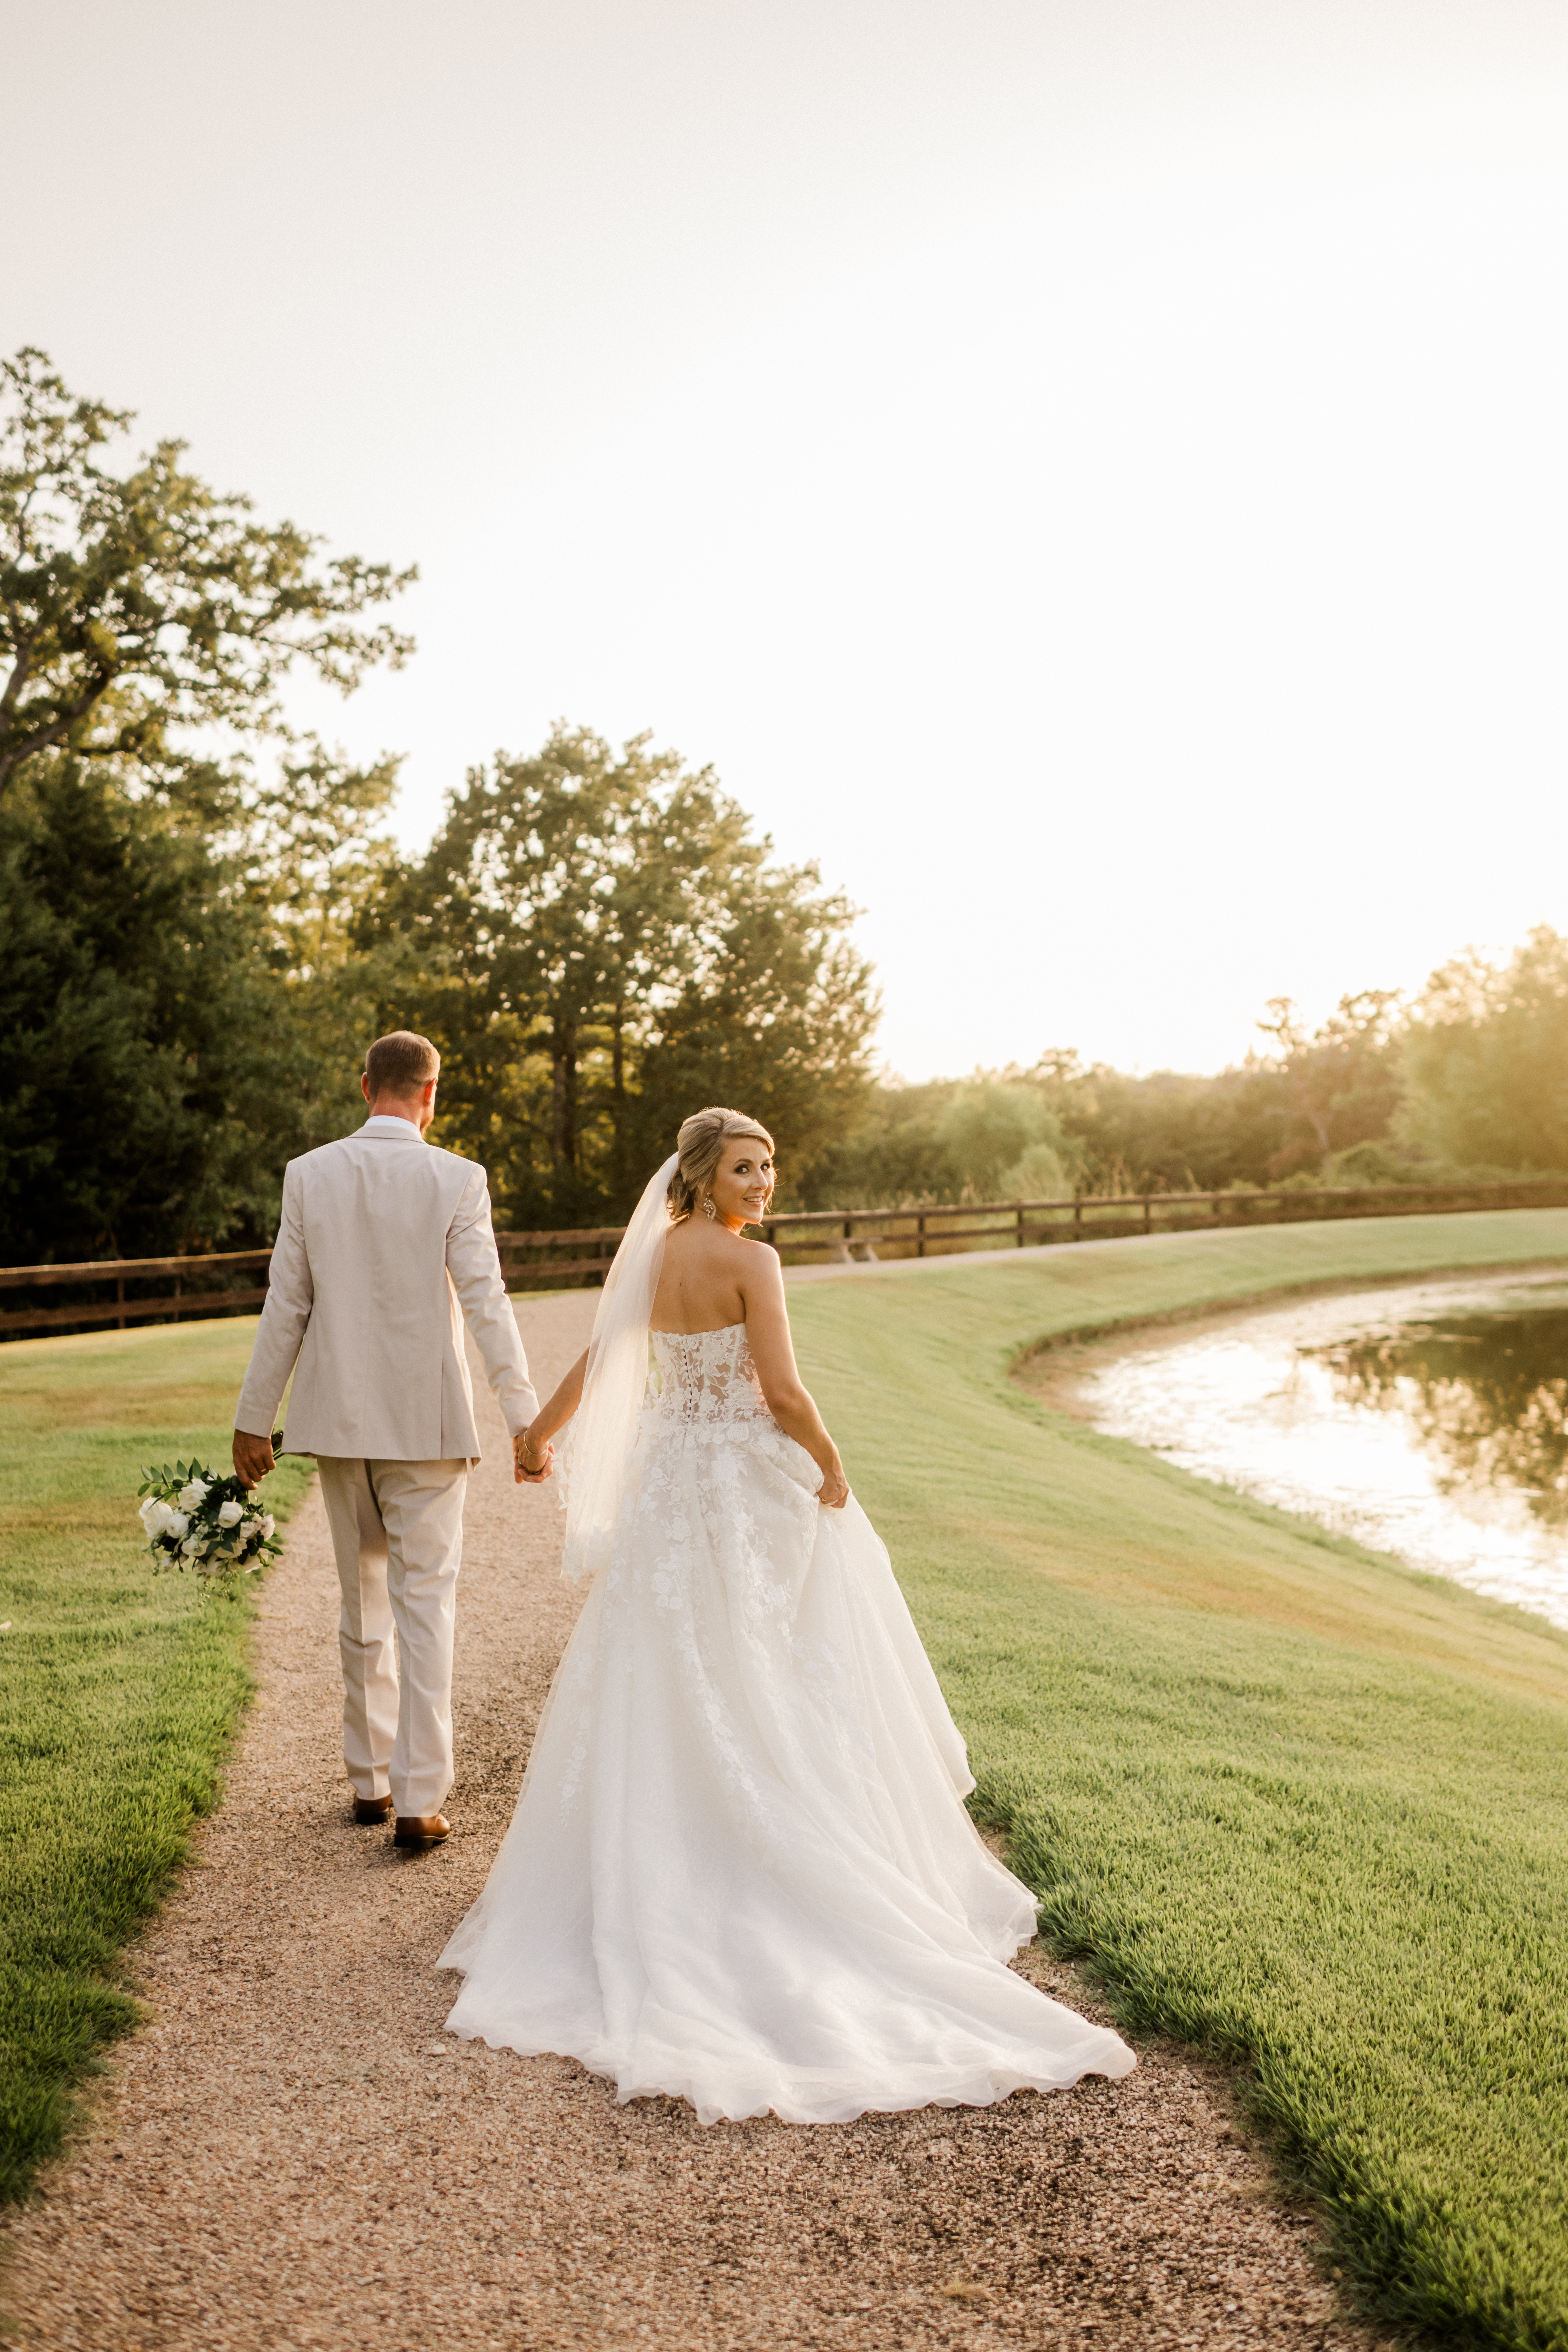 Hannah and Travis' Wedding at Peach Creek Ranch in College Station, TX with Rachel Driskell Photography